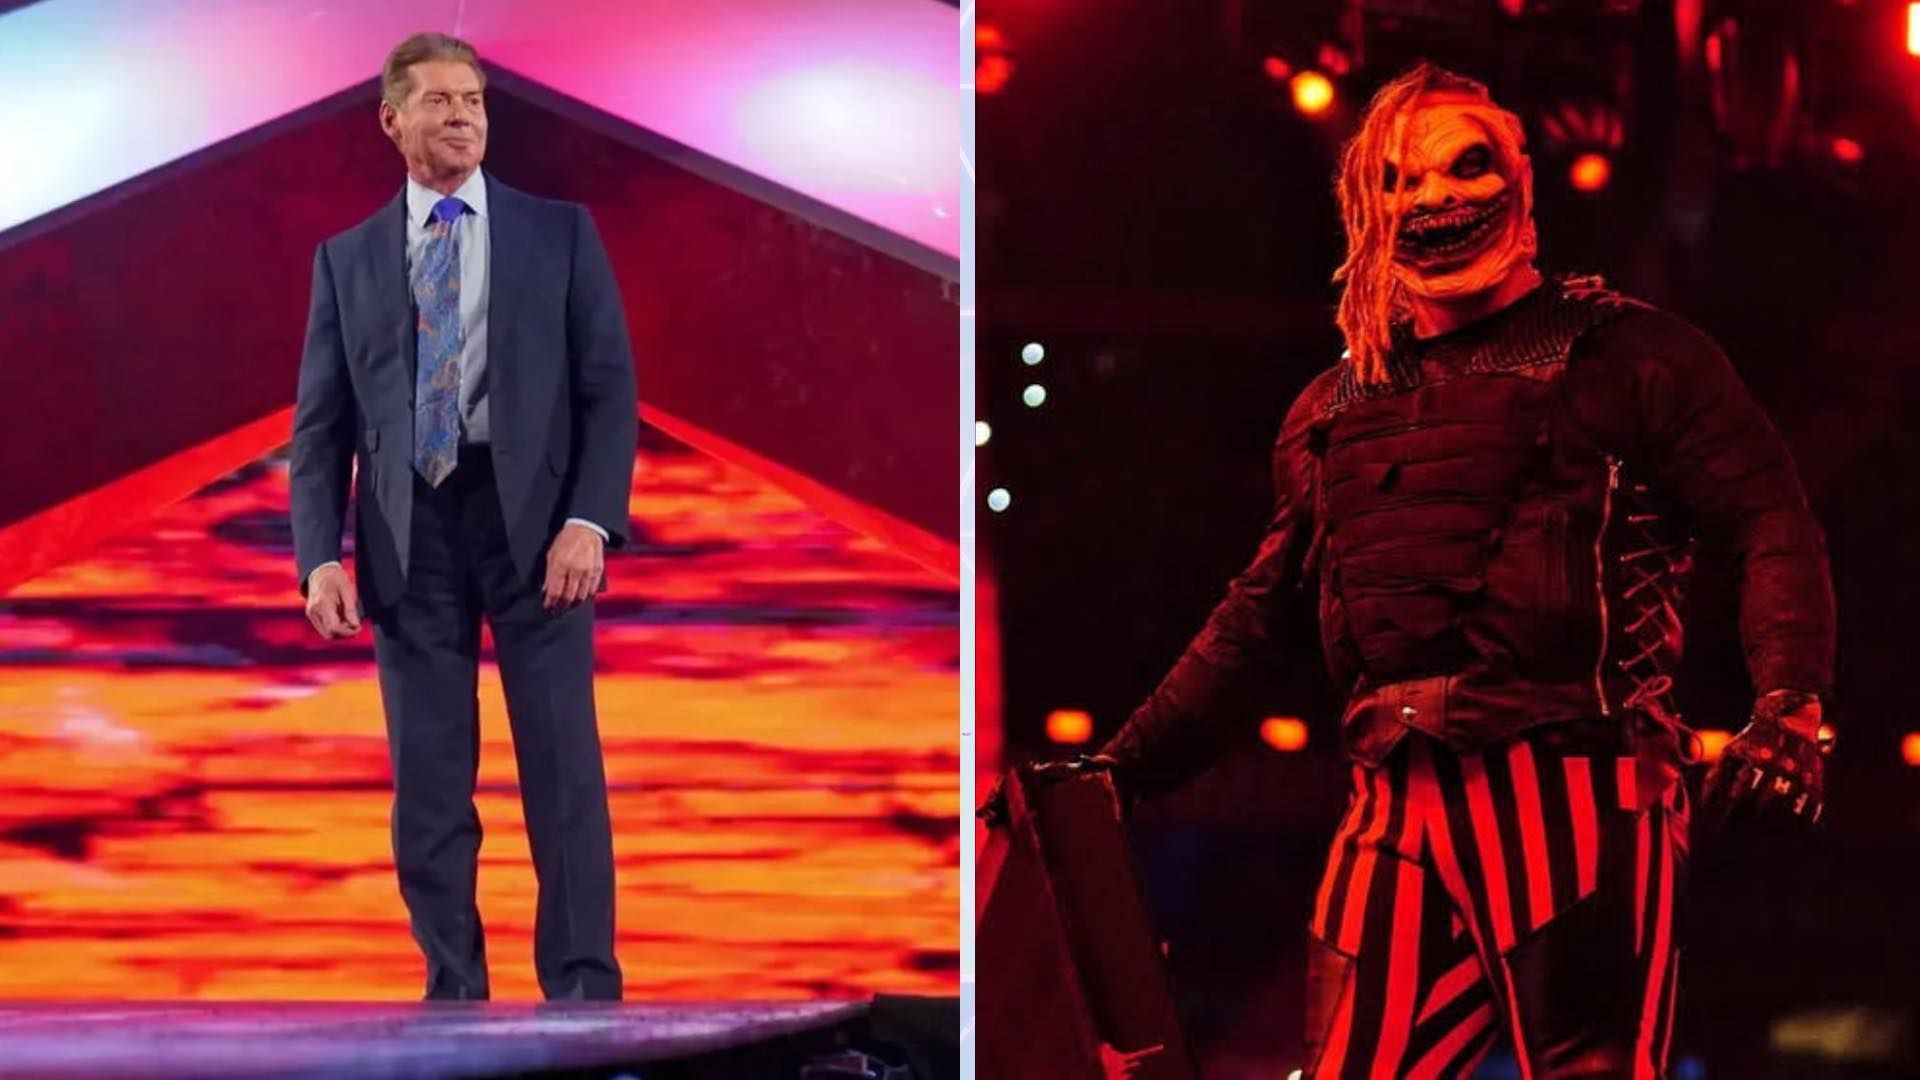 The Fiend confronted Vince McMahon on WWE SmackDown in 2020.